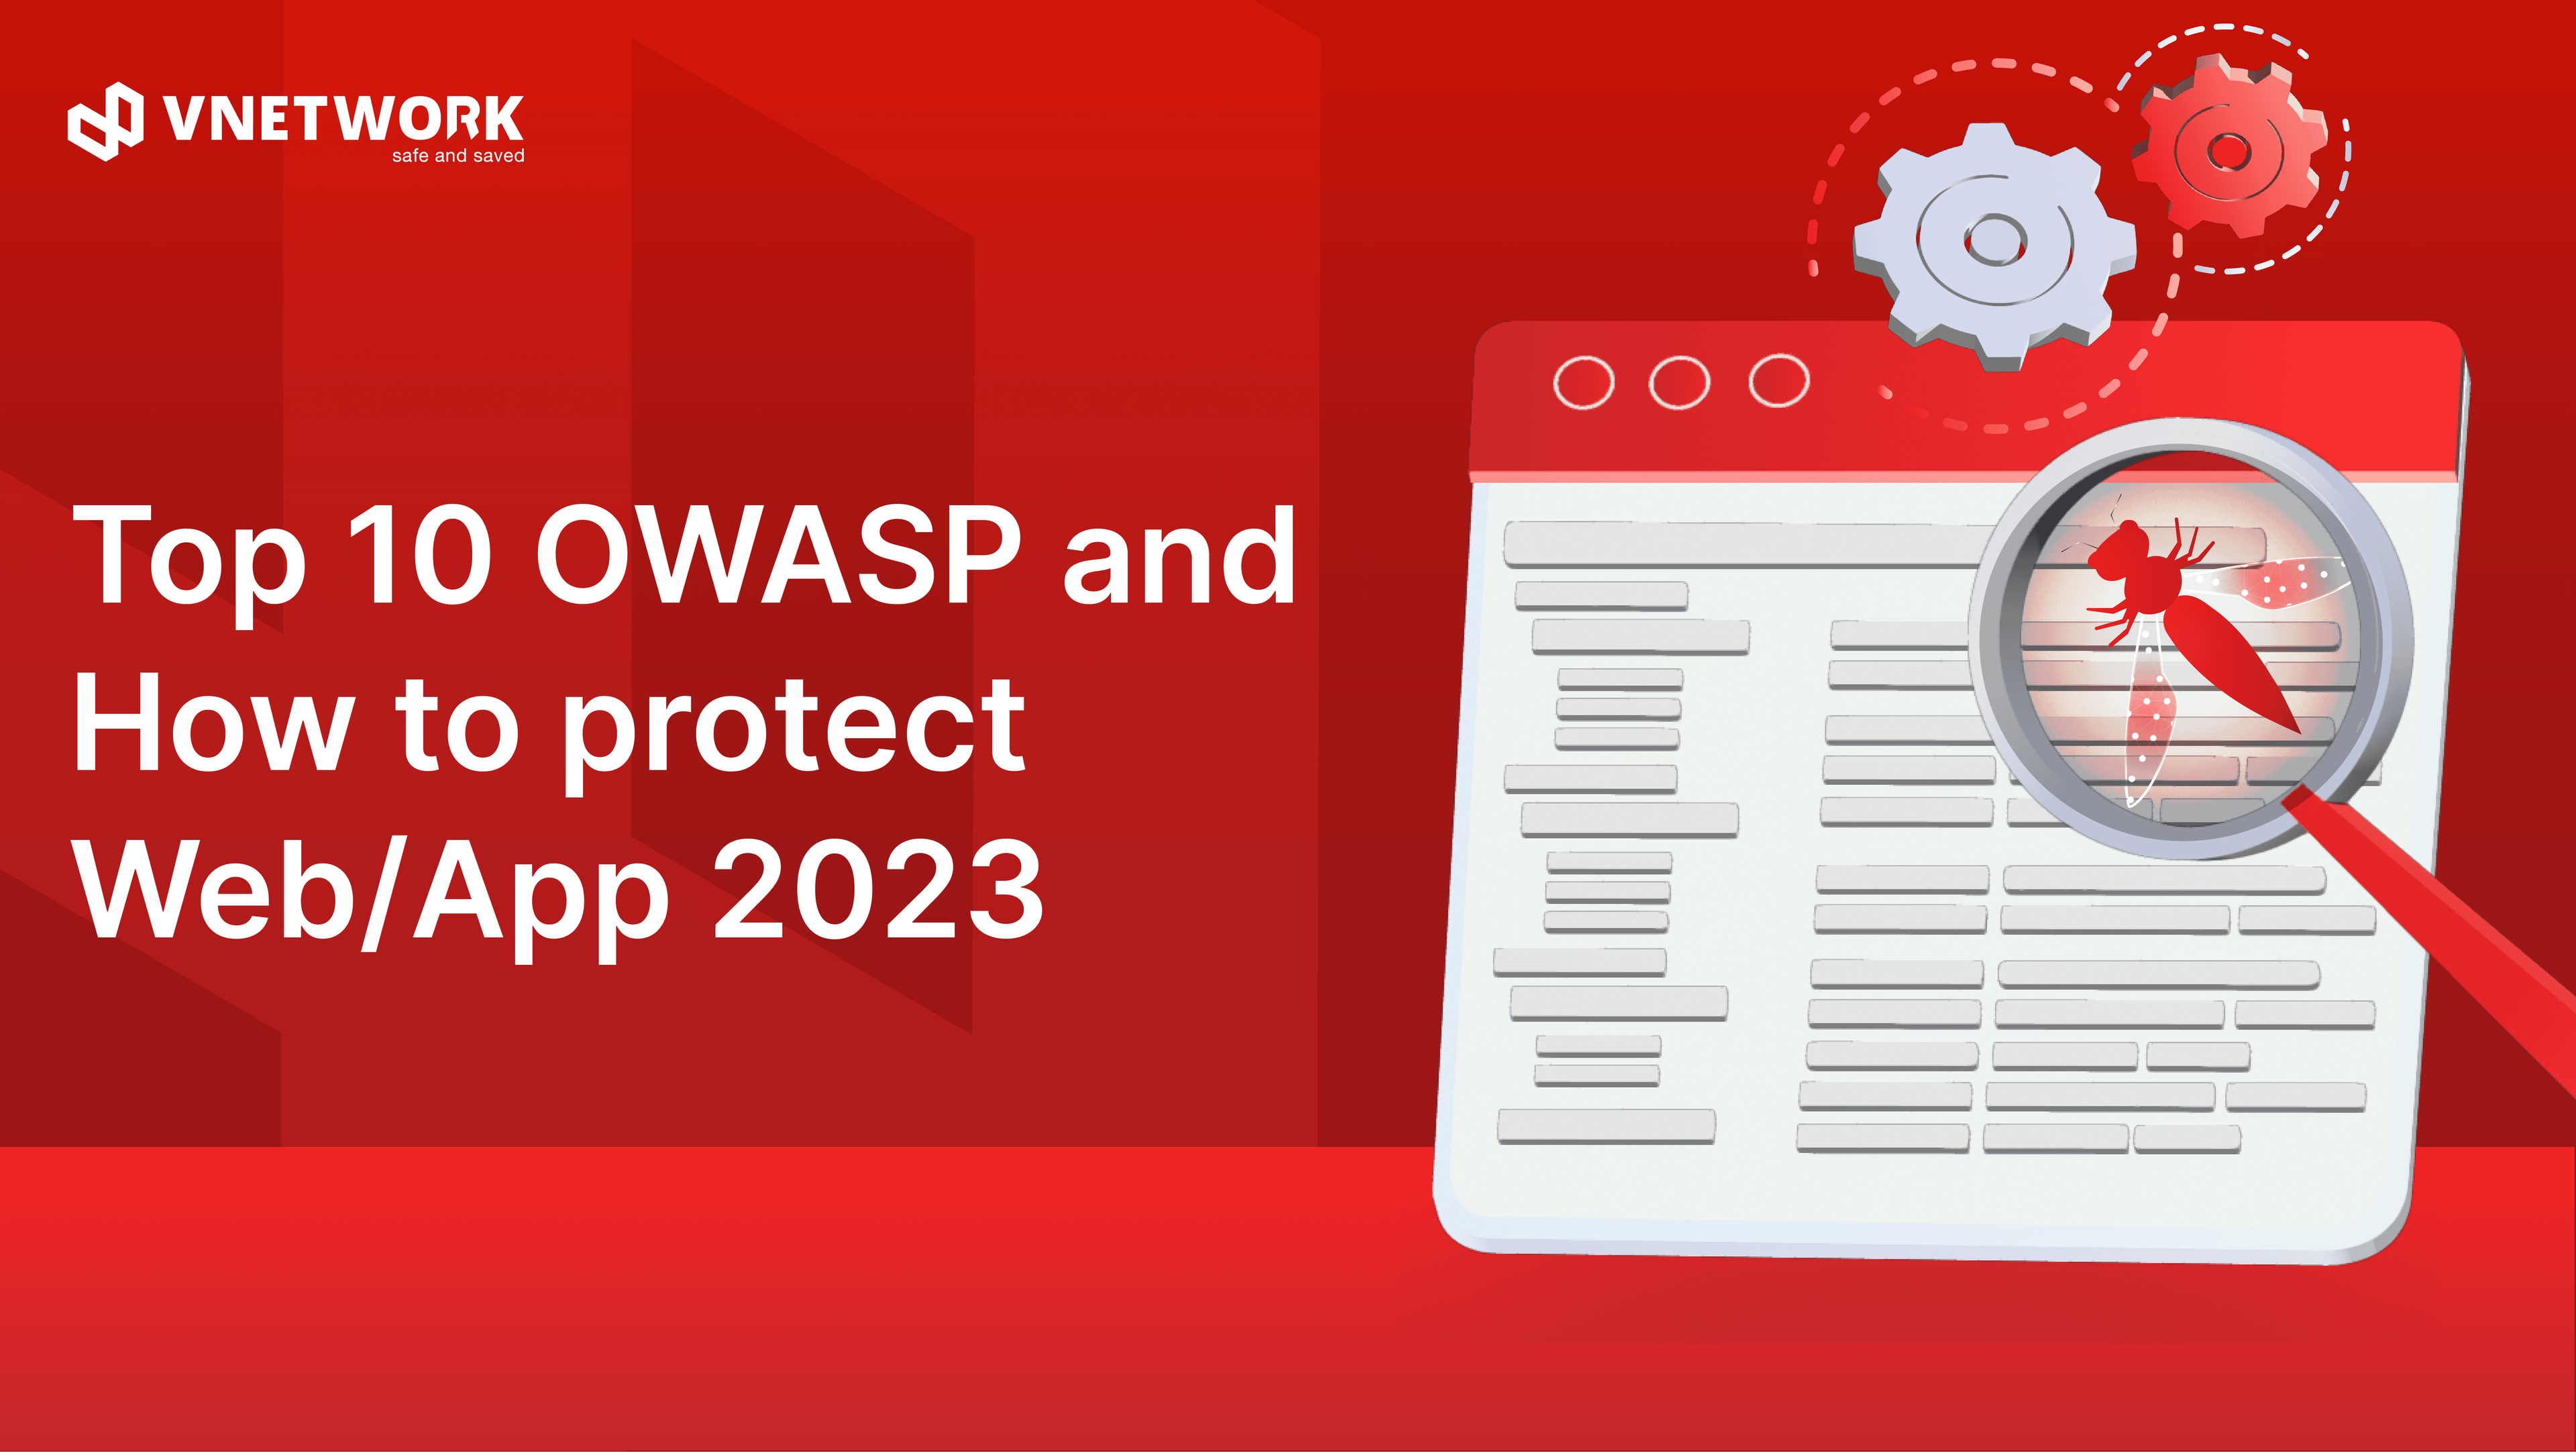 Top 10 vulnerabilities of OWASP and how to protect Web/App